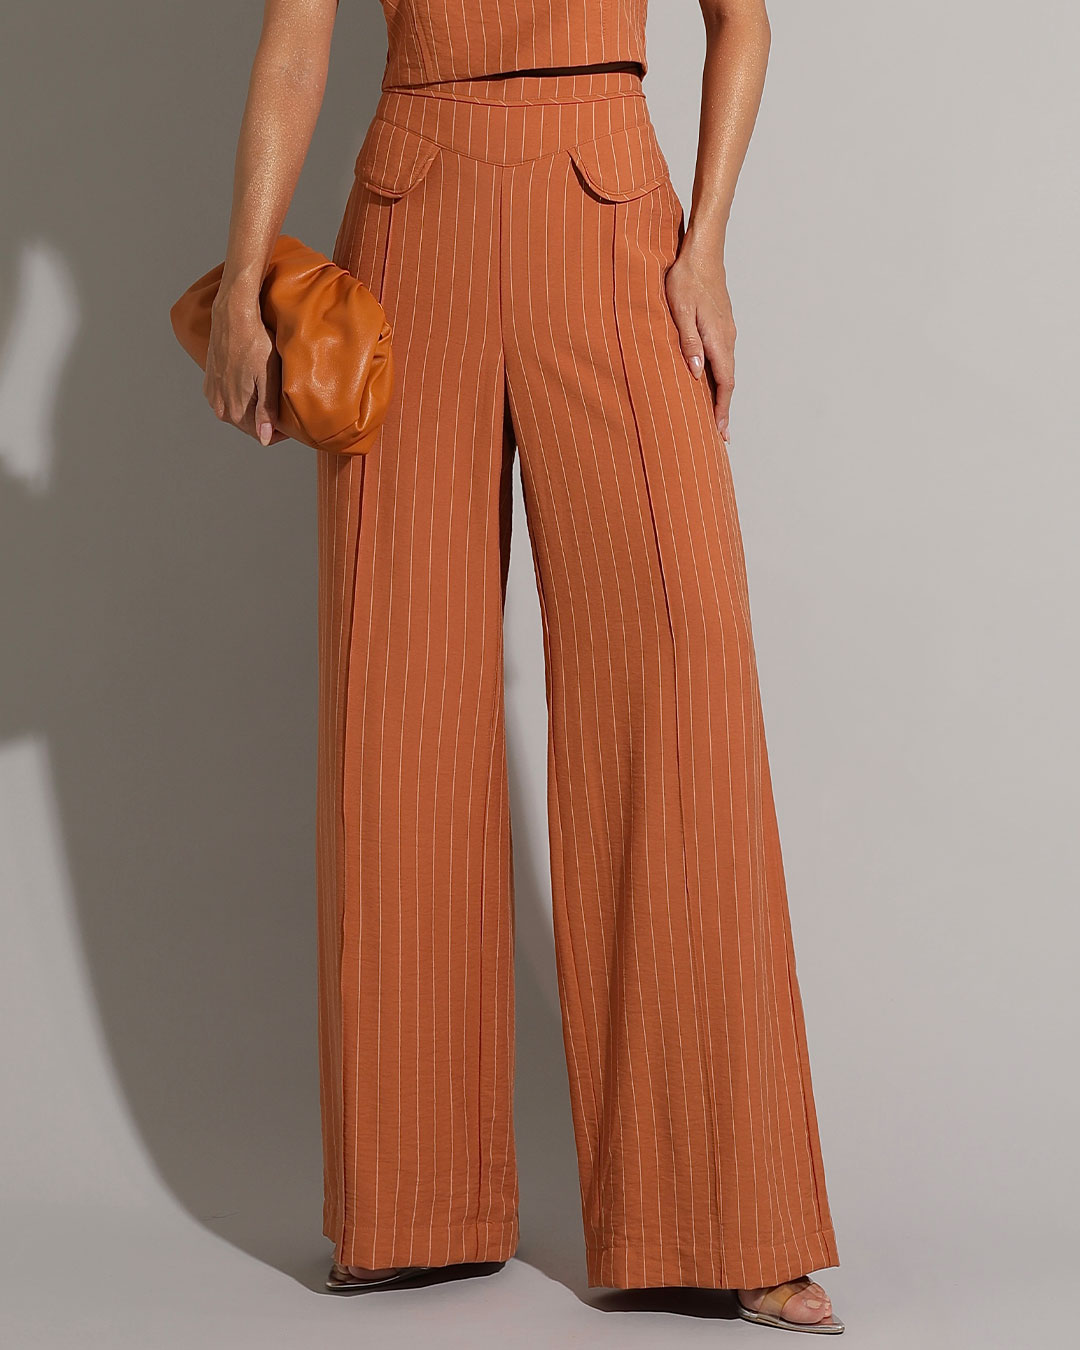 Miss Misses - Miss Misses Cropped Pinstripe Set and Caramel Pants - 54213134